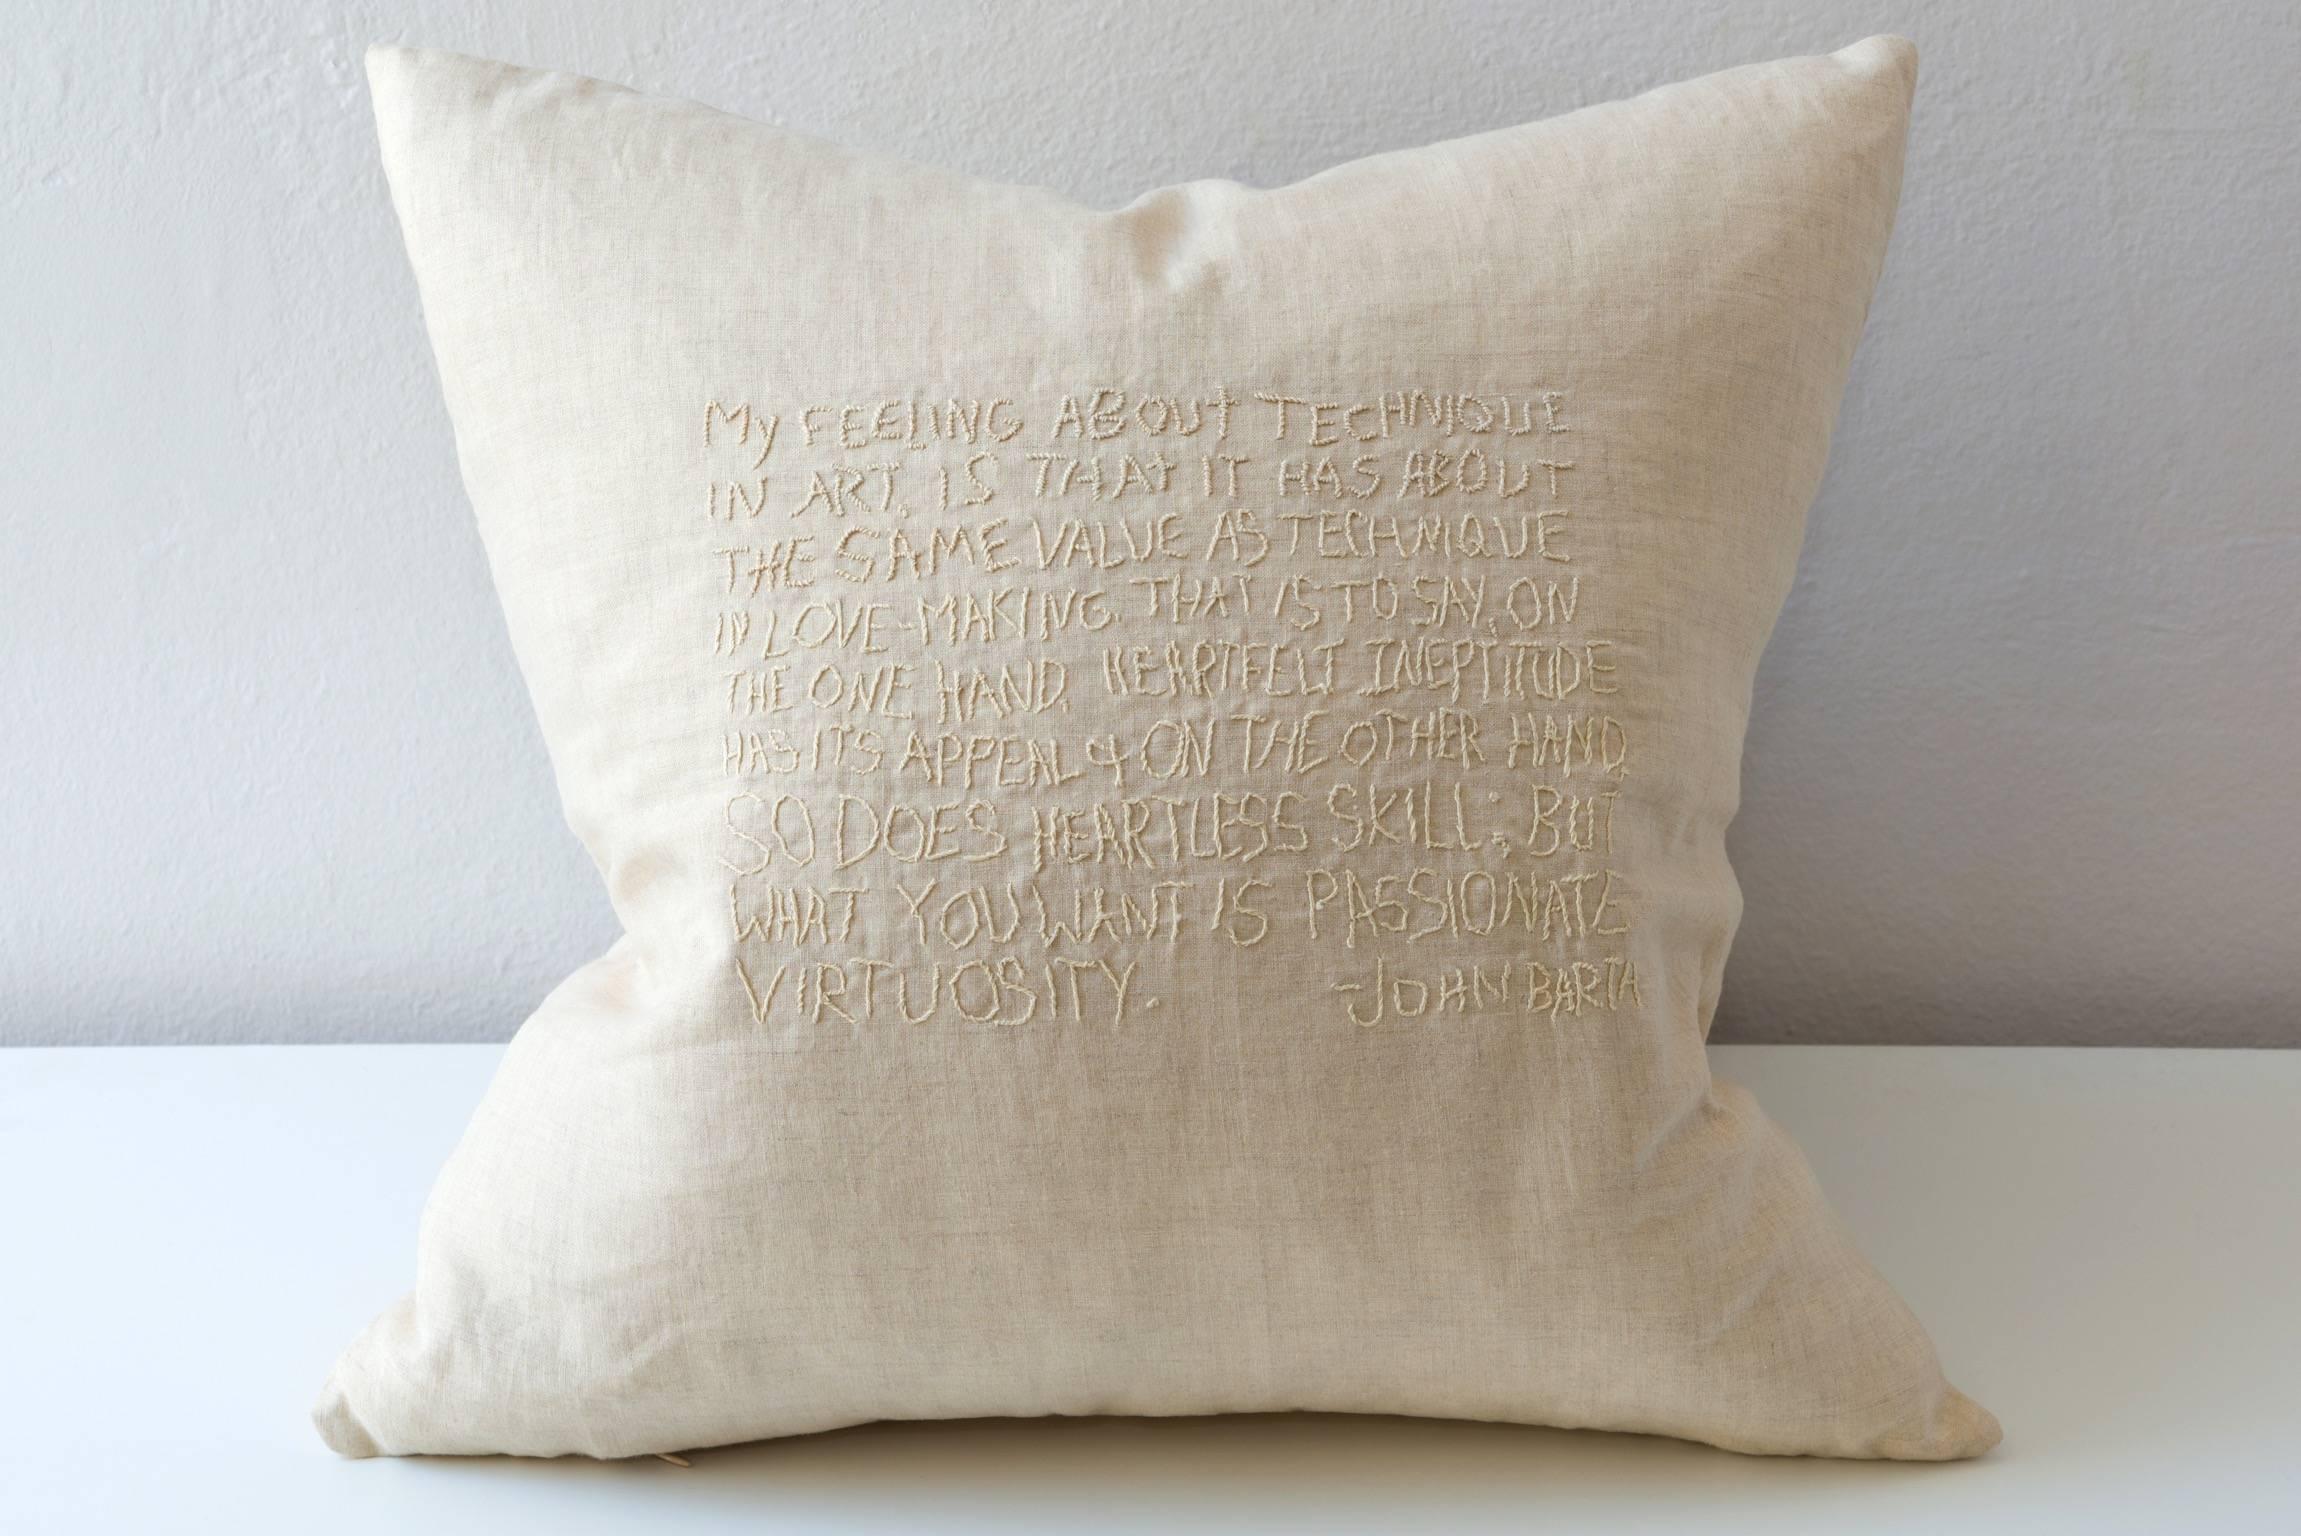 Cotton Embroidered Text Cushion John Barth For Sale